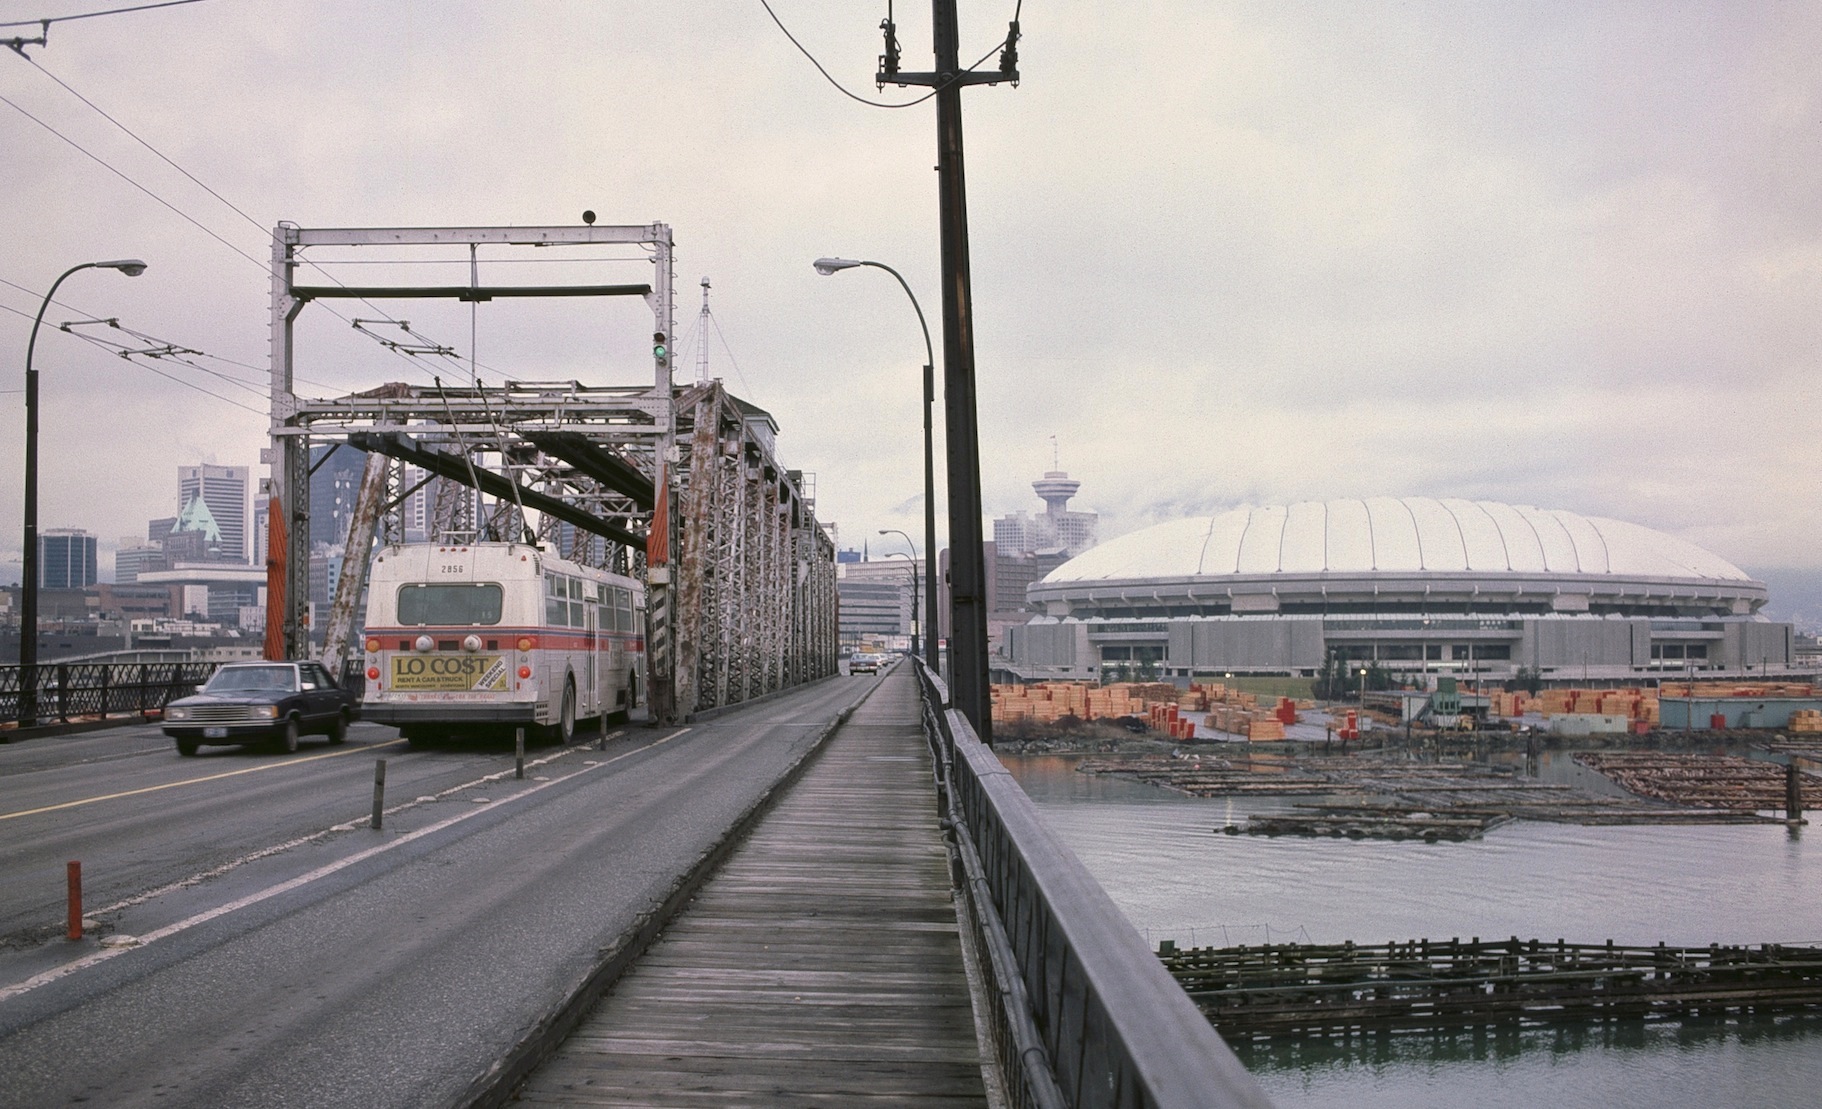 Old Cambie St. swing bridge, 1983. Photo by S. J. Morgan.